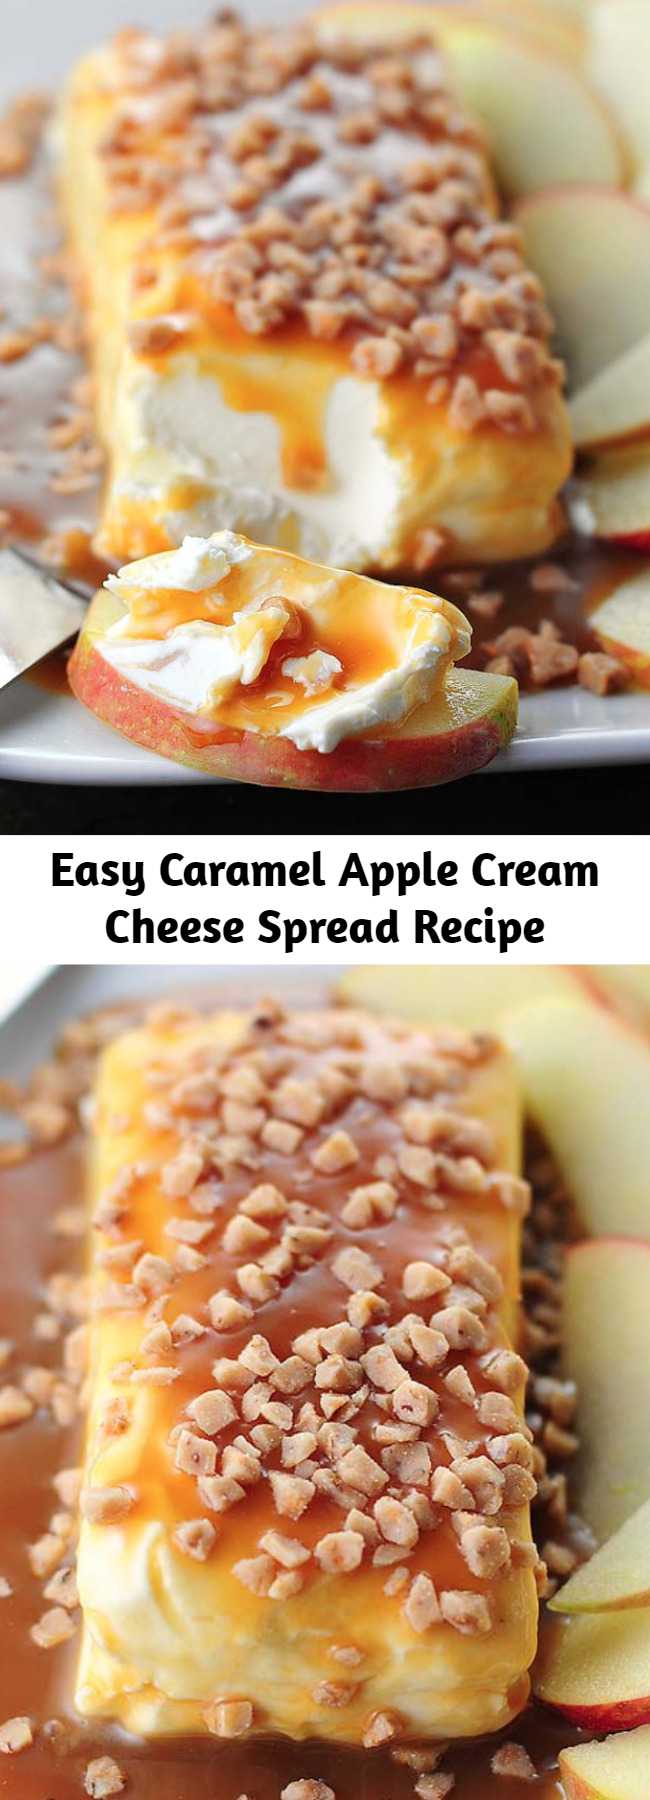 Easy Caramel Apple Cream Cheese Spread Recipe - This easy party spread is super satisfying and so easy to make and perfect for any fall entertaining.